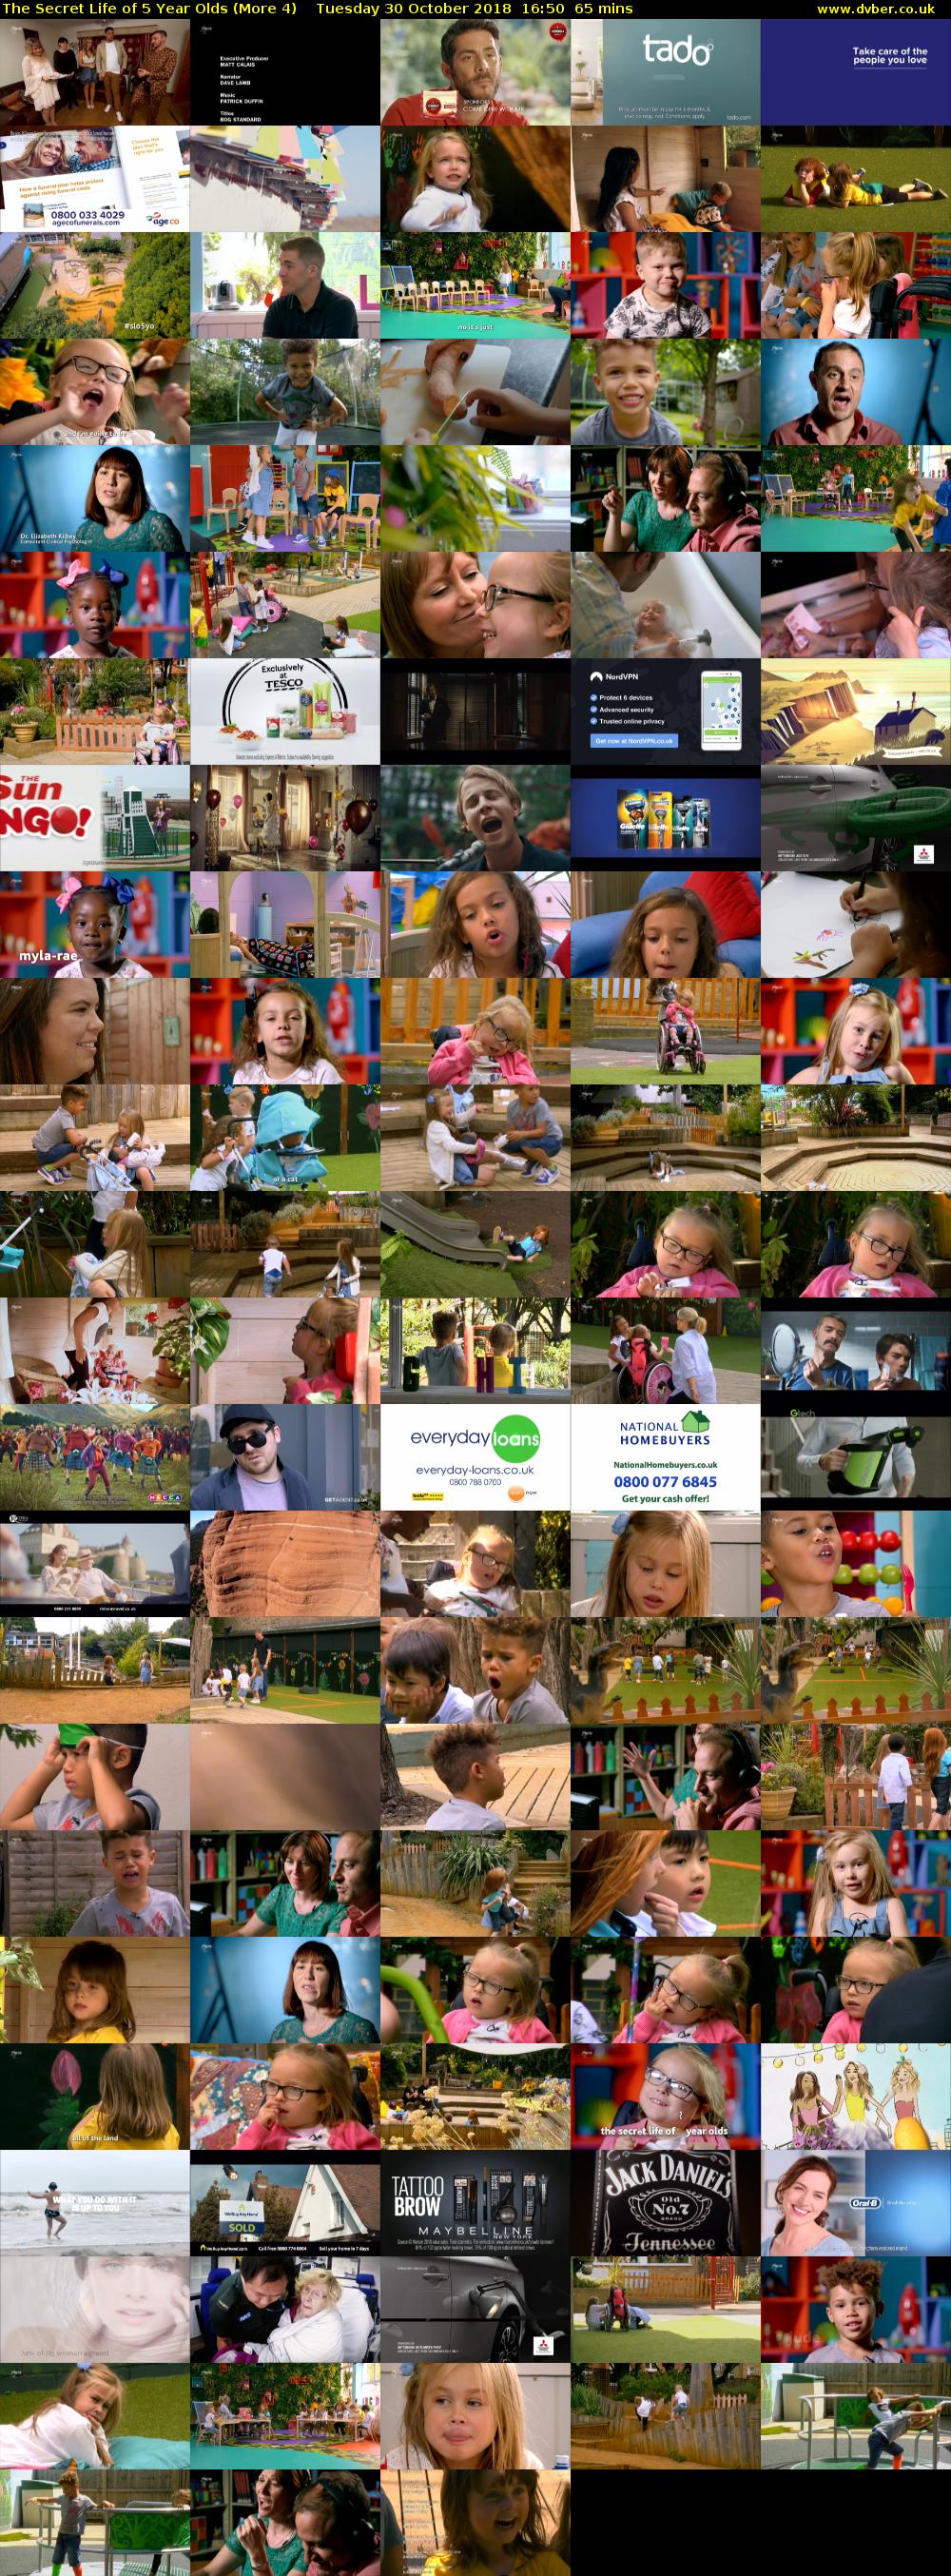 The Secret Life of 5 Year Olds (More 4) Tuesday 30 October 2018 16:50 - 17:55